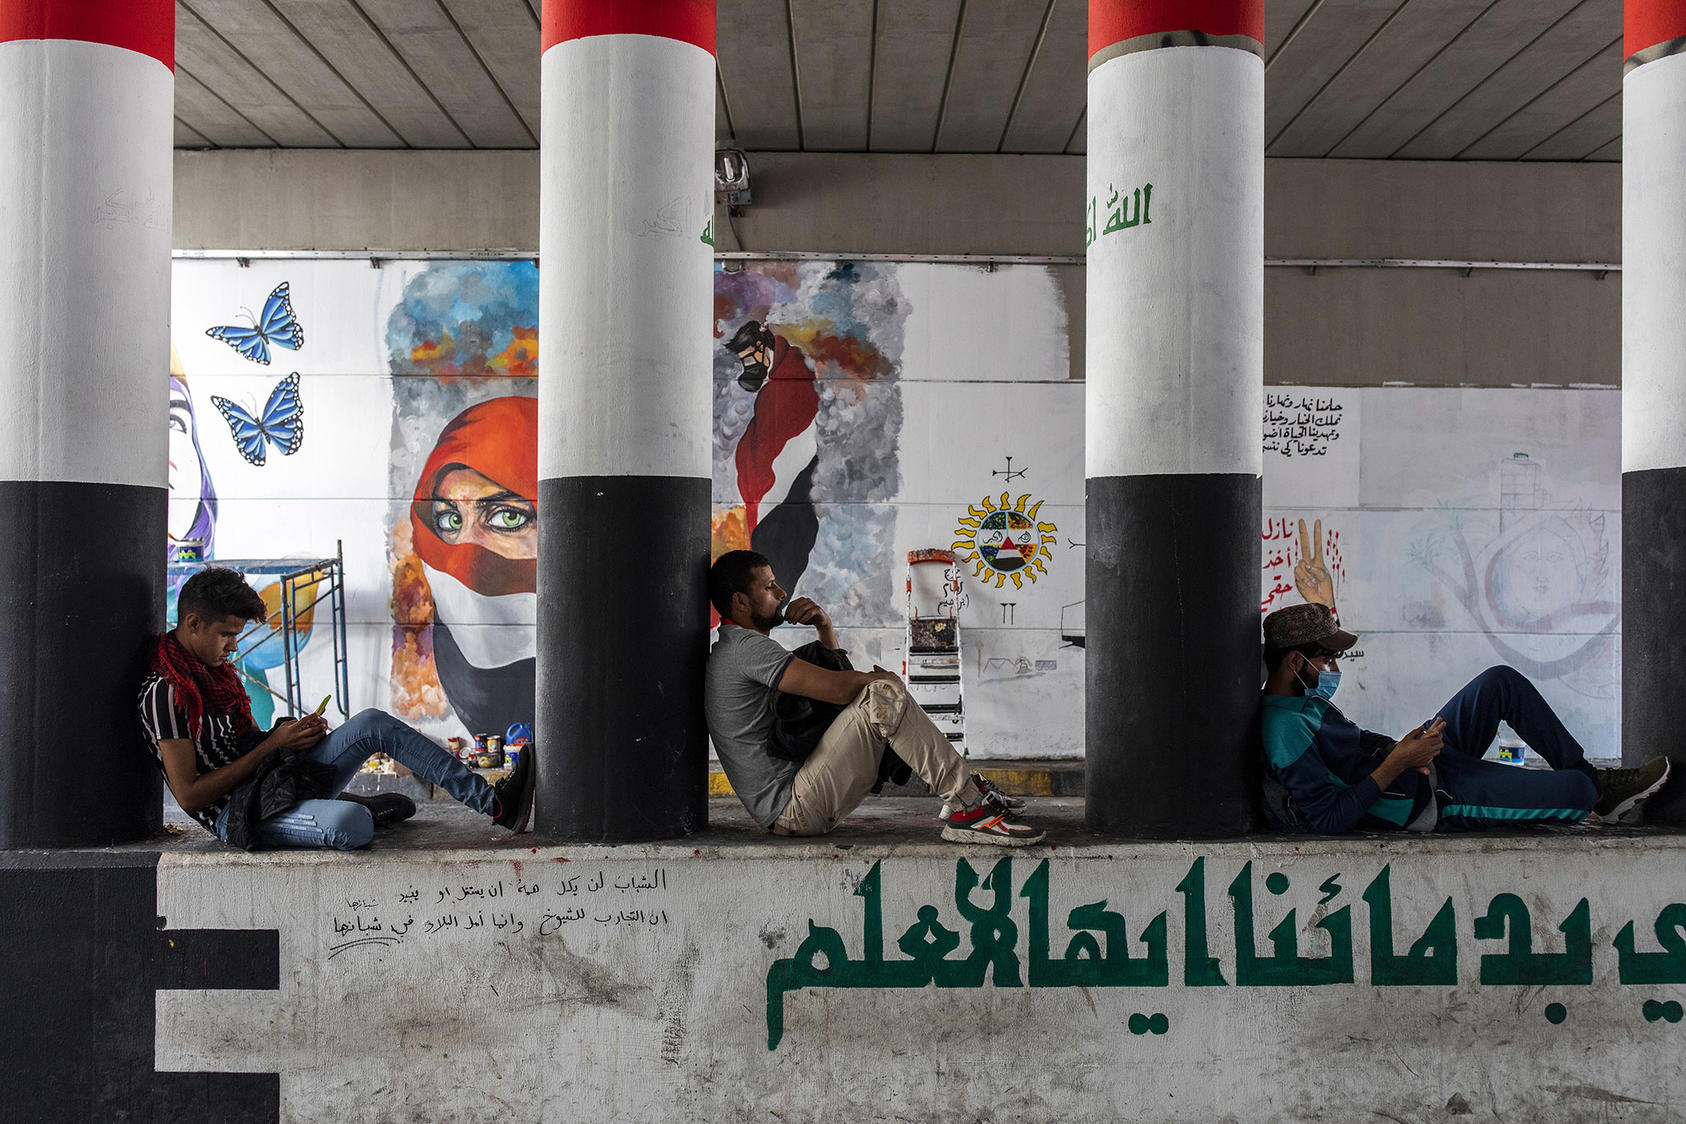 Antigovernment protesters sit in front of murals in Baghdad on Nov. 22, 2019.  (Ivor Prickett/The New York Times)